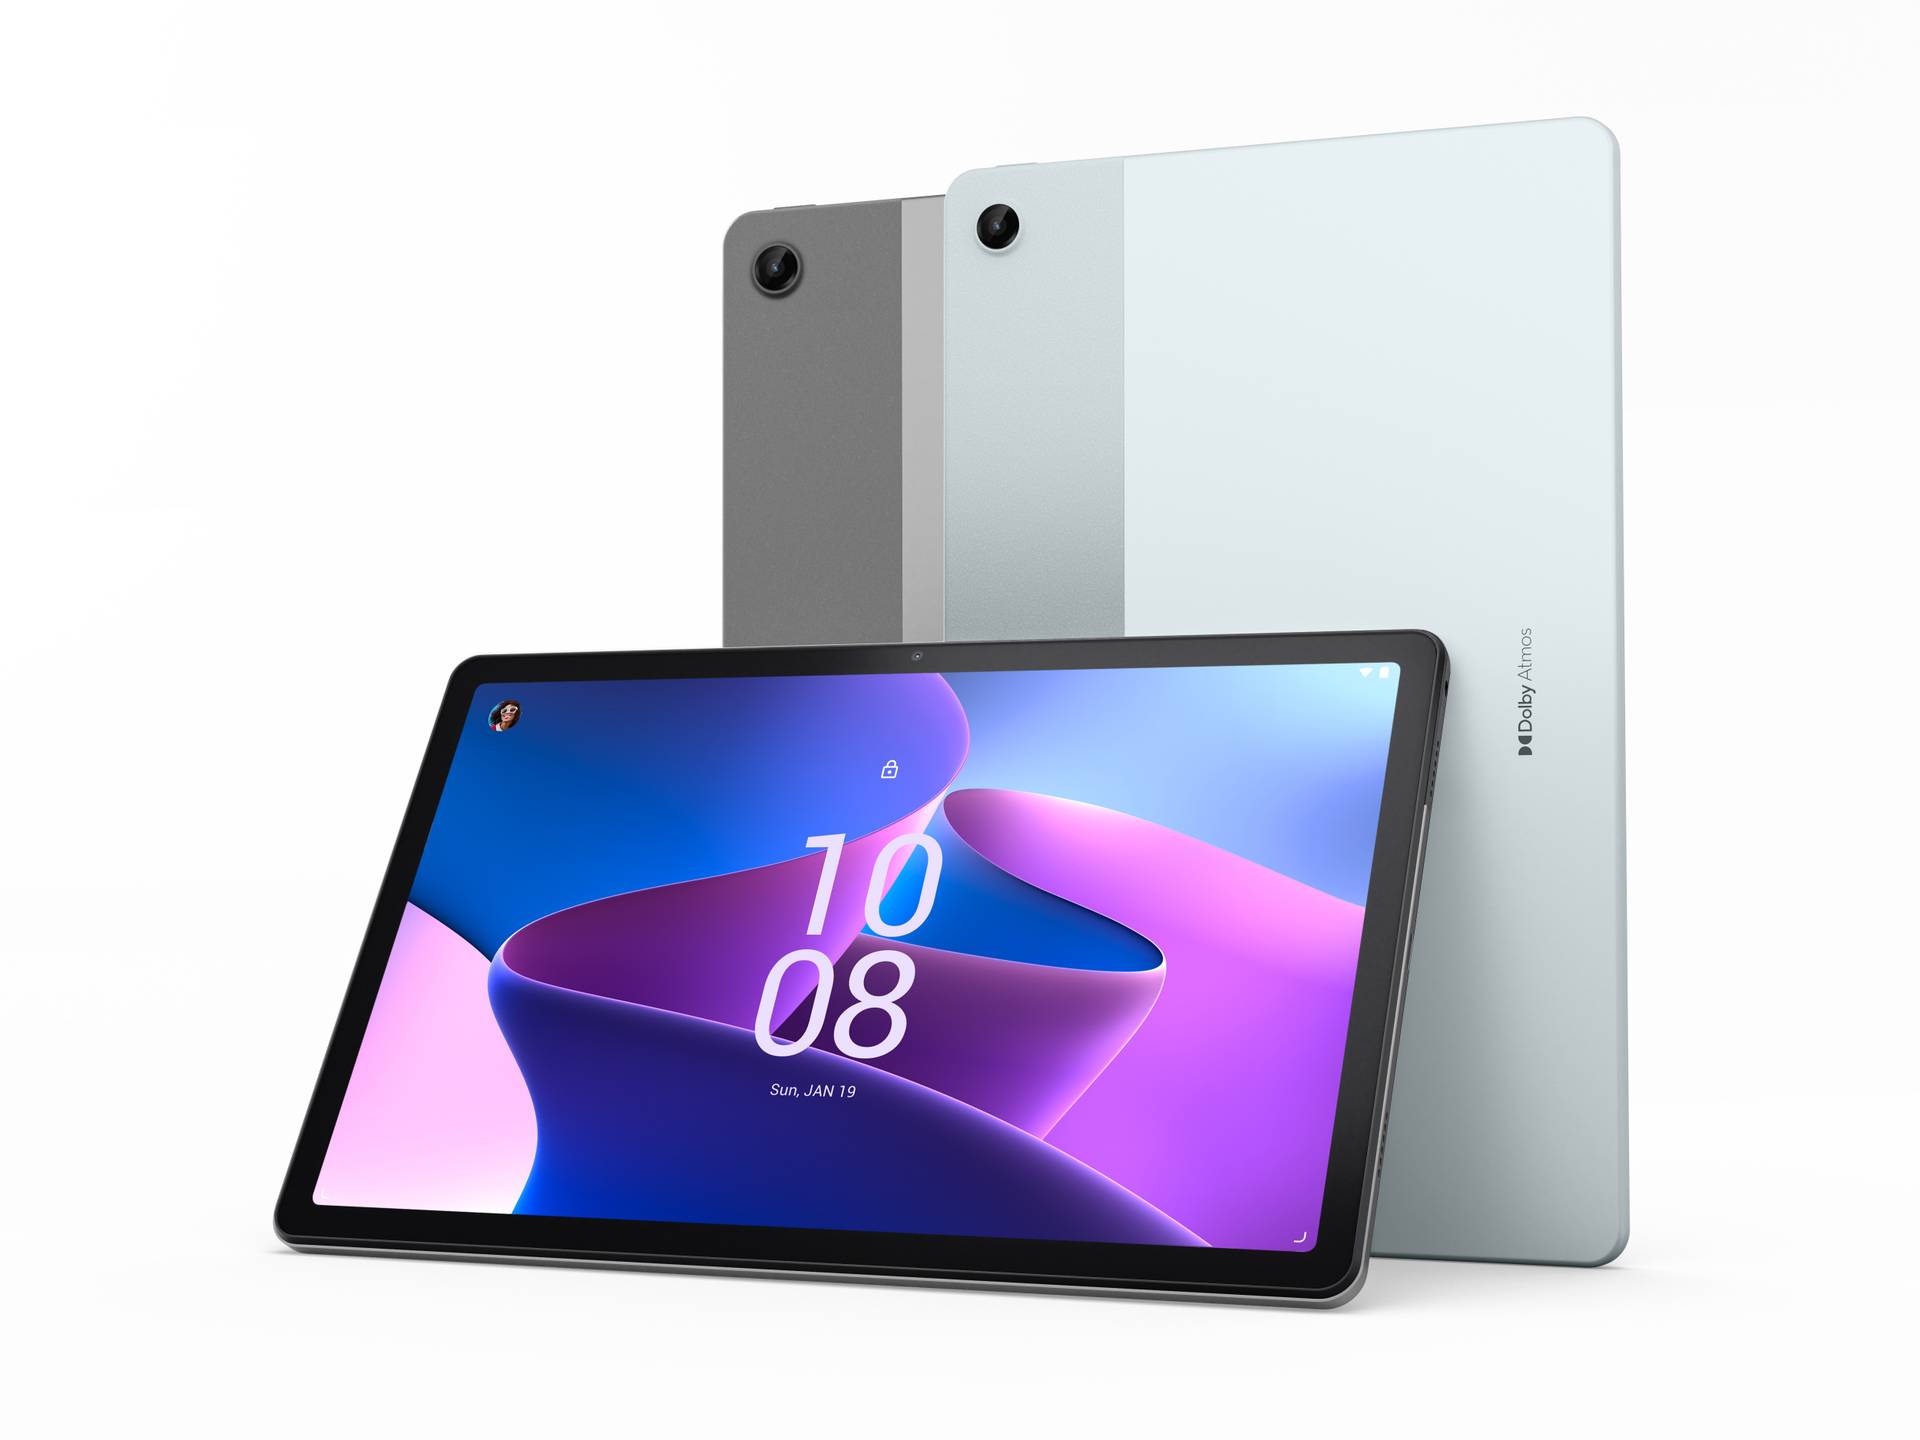 The Lenovo Tab M10 Plus is a budget Android tablet that promises three years of security updates